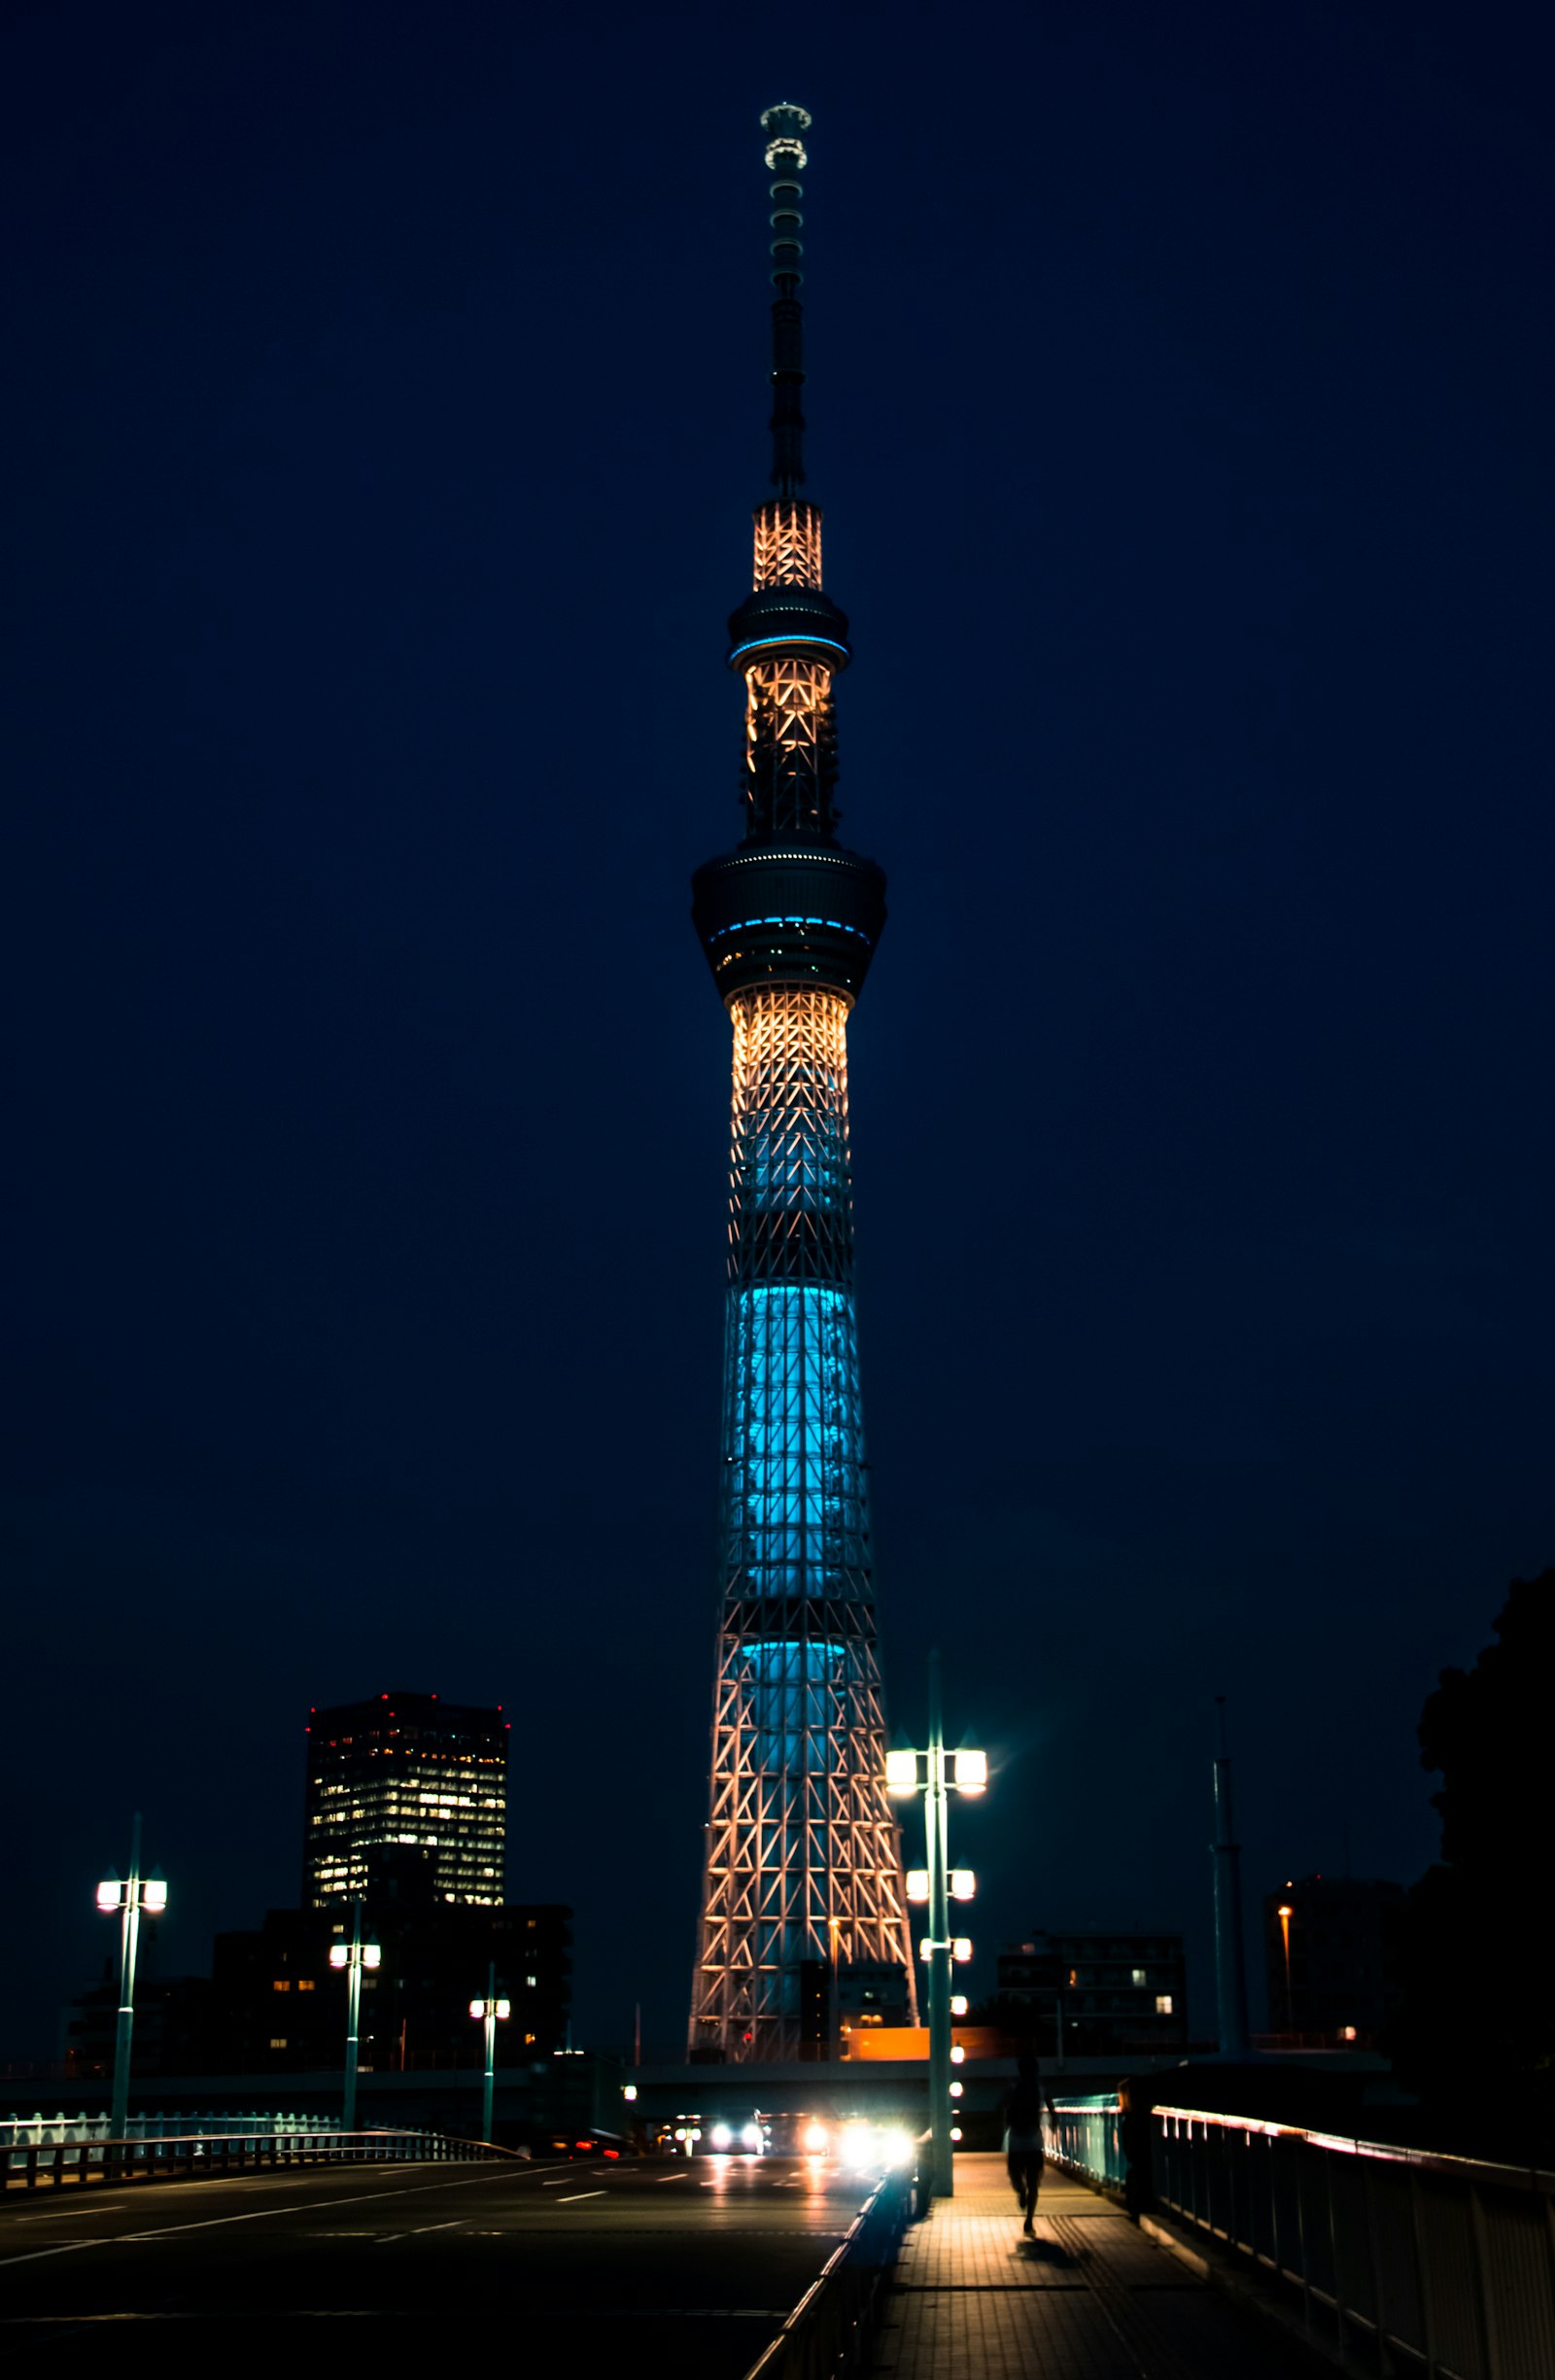 Tamron 18-270mm F3.5-6.3 Di II VC PZD sample photo. Lighted tower during night photography